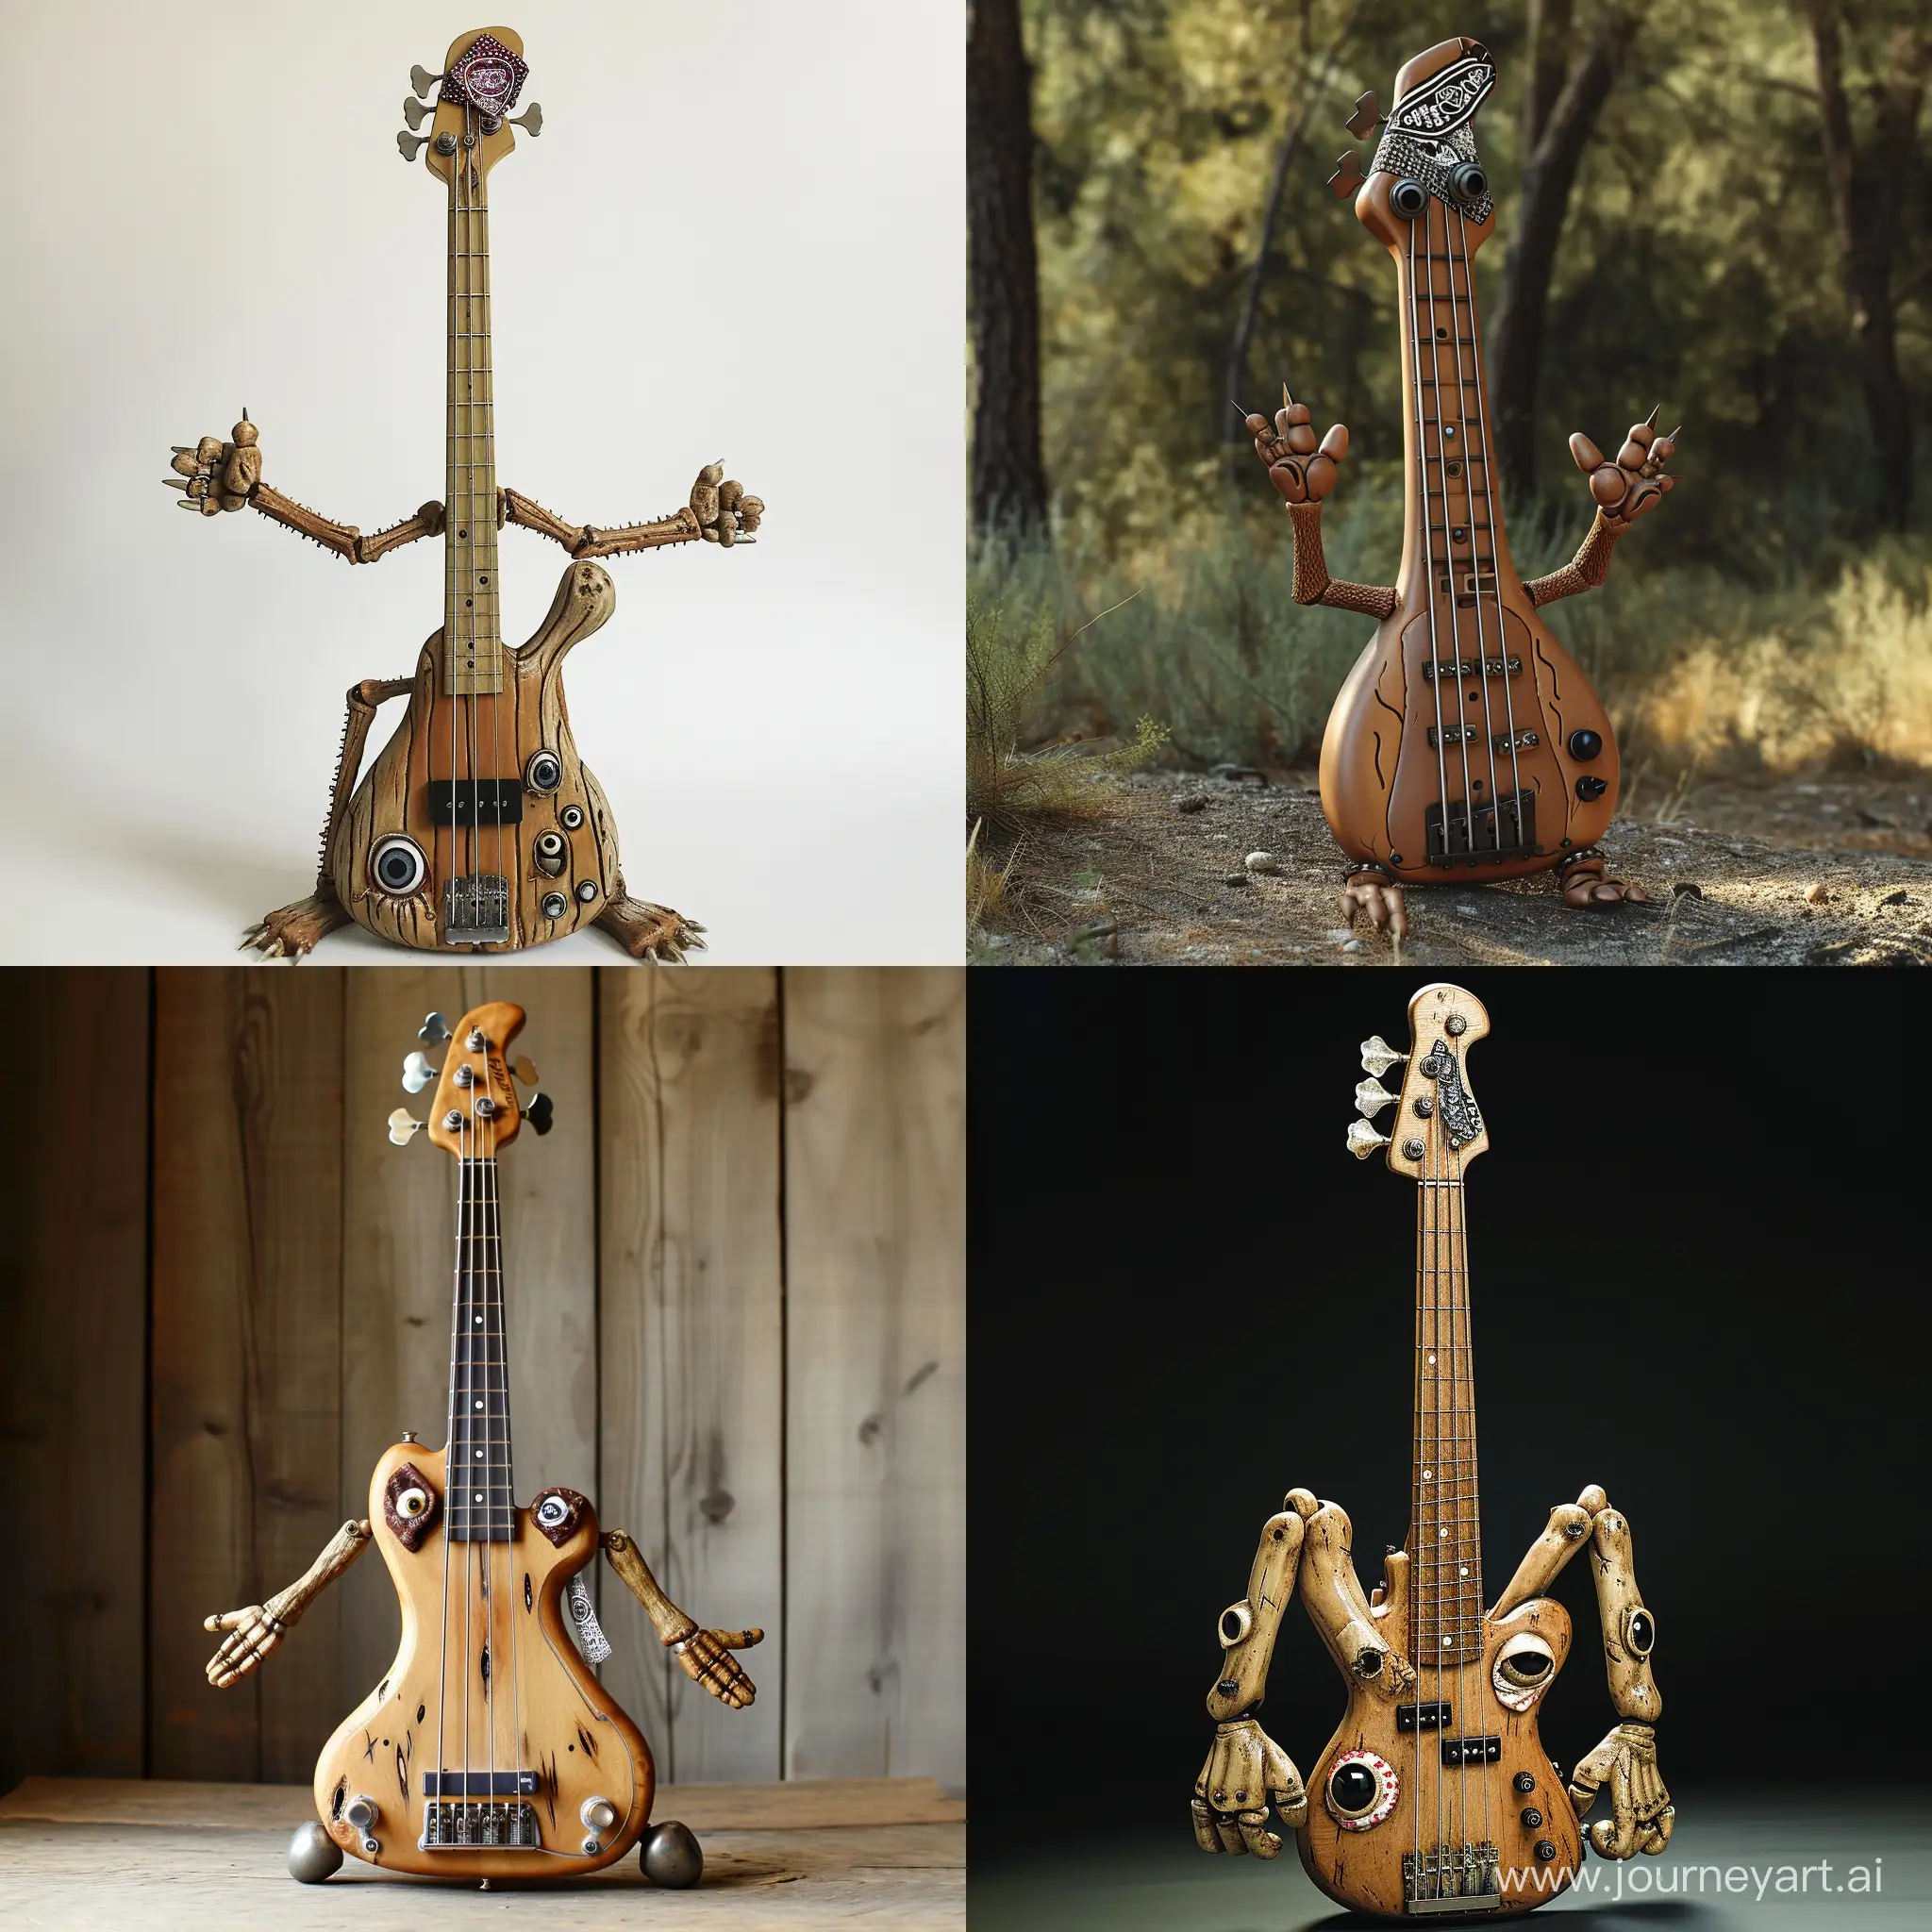 bass guitar with arms on the sides of its body and leg from the bottom of its body. Eyes on each side of the fretboard and bandana on its headstock